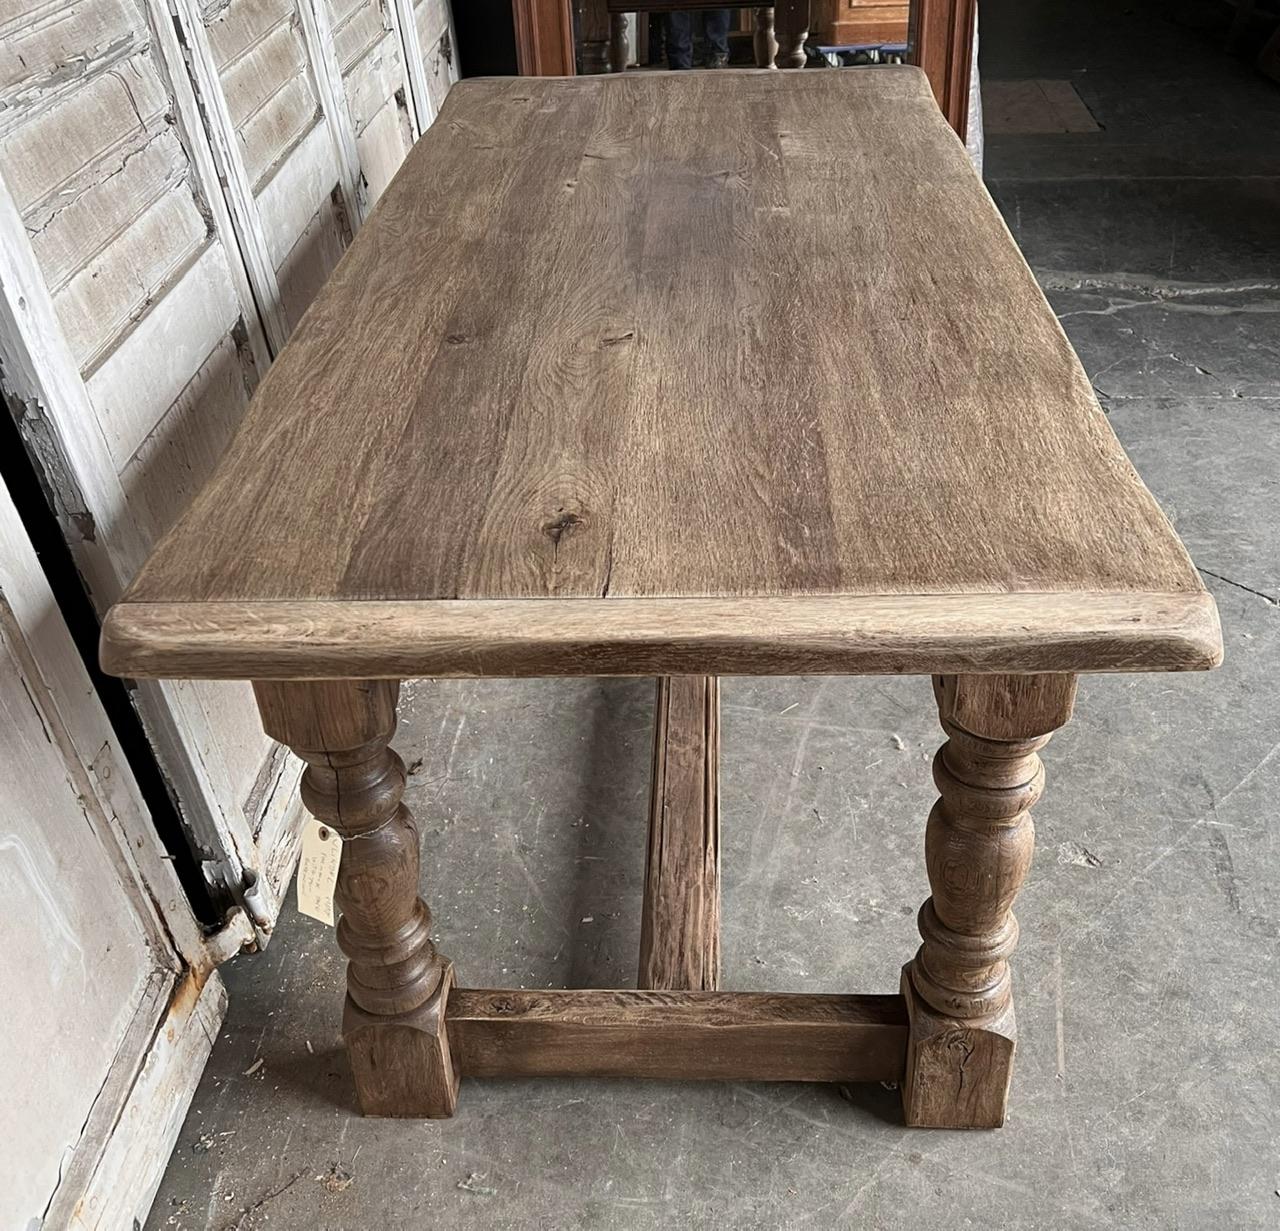 A very hard to find table this one, almost the perfect Christmas Table !! So French in origin dating to the early 1900s. Made of solid Oak which we have bleached for a lighter look and to bring out the natural wood. The main Table can be used